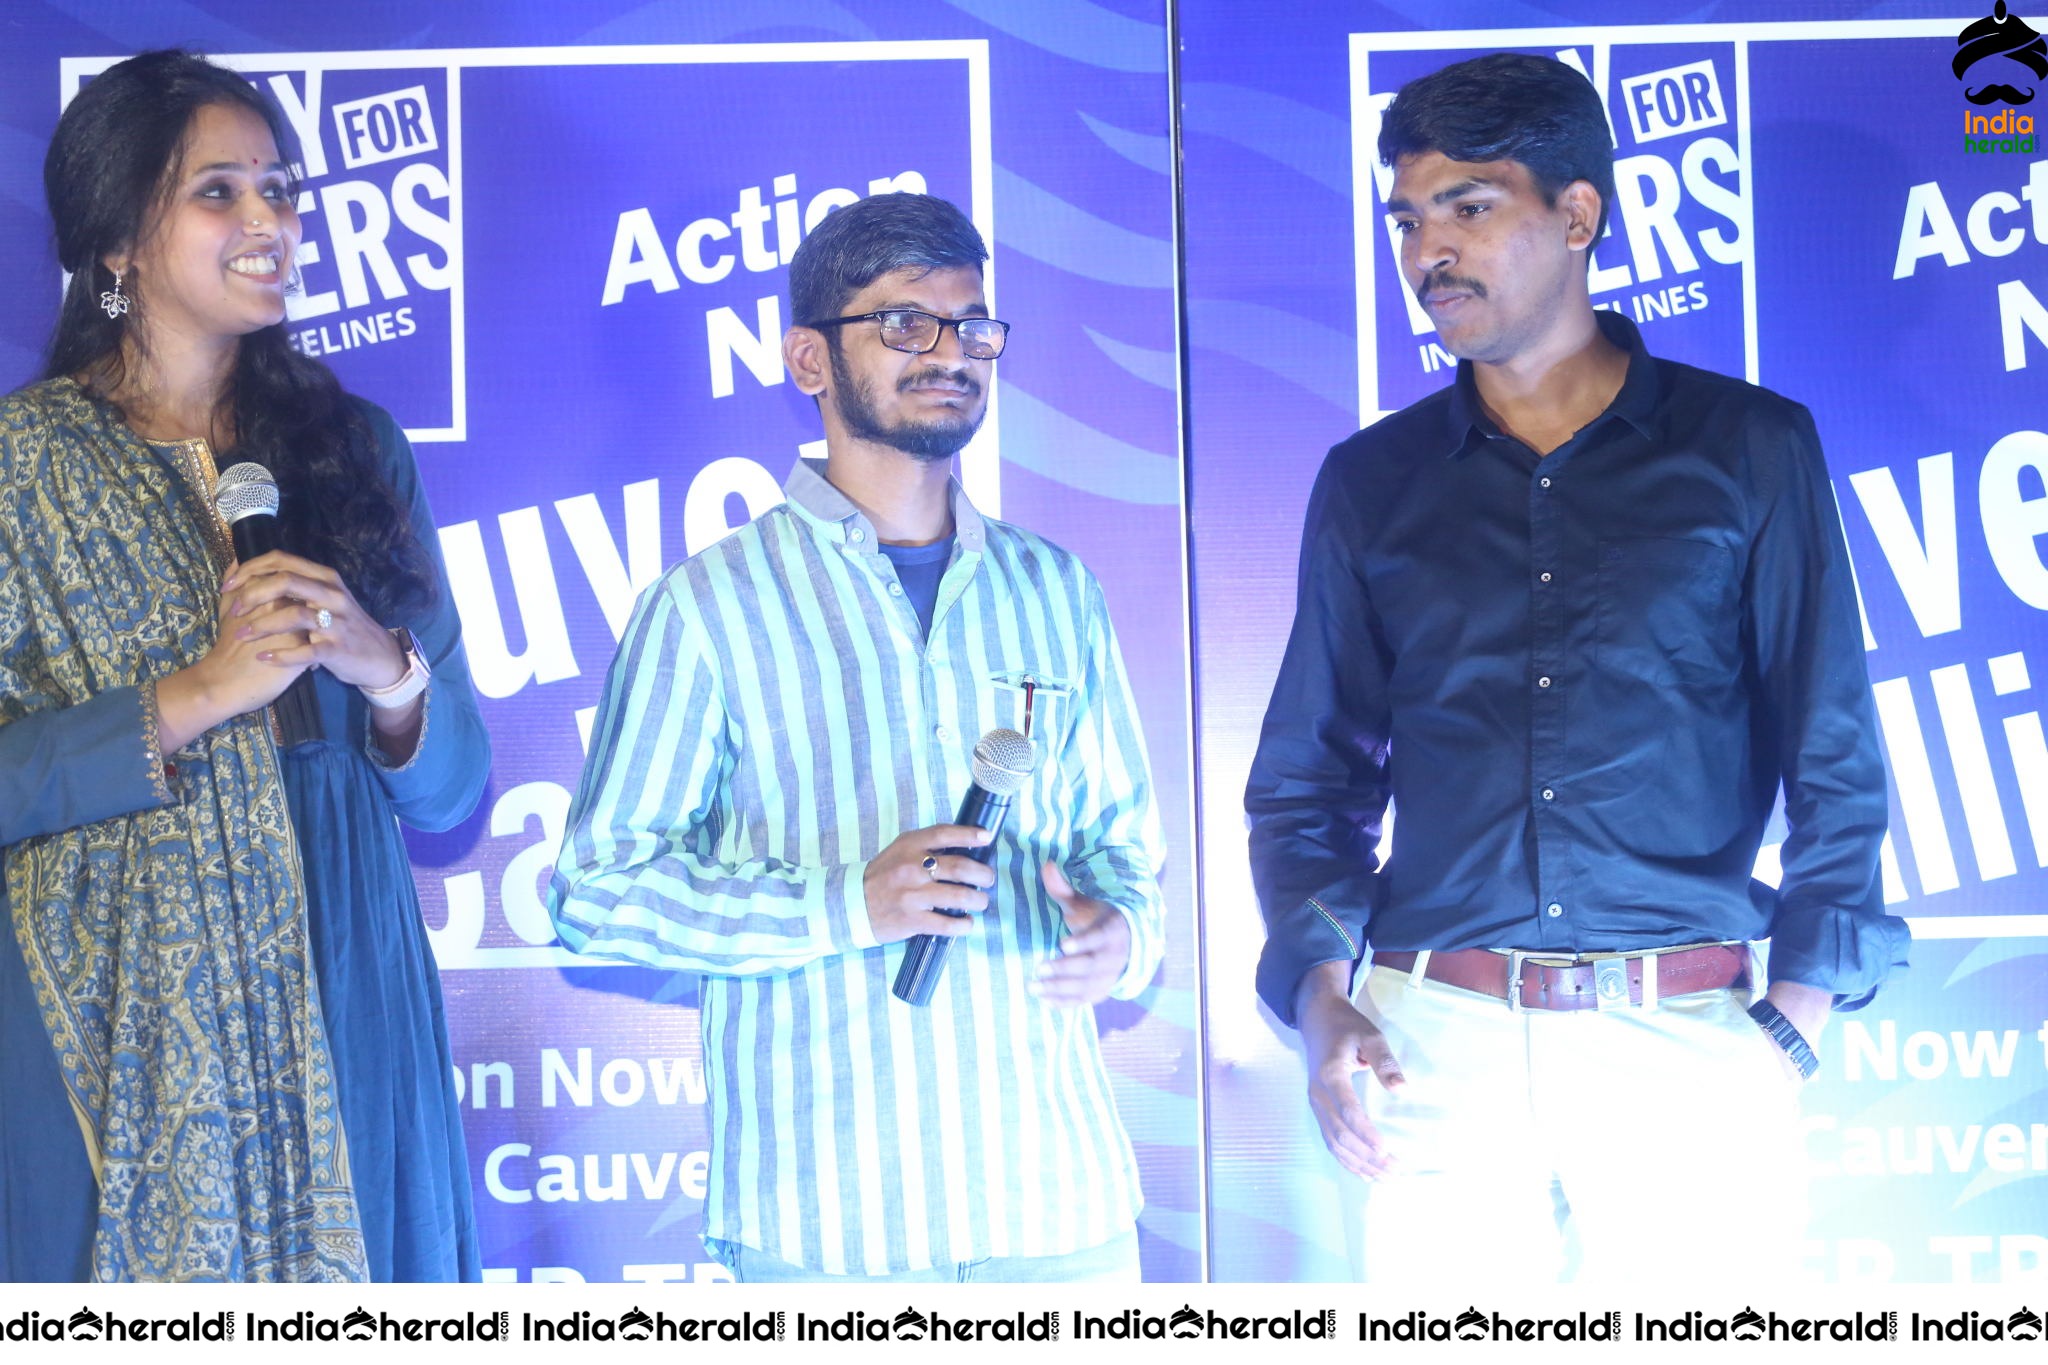 Pop Singer Smita Rally for Rivers Song Launch Set 1